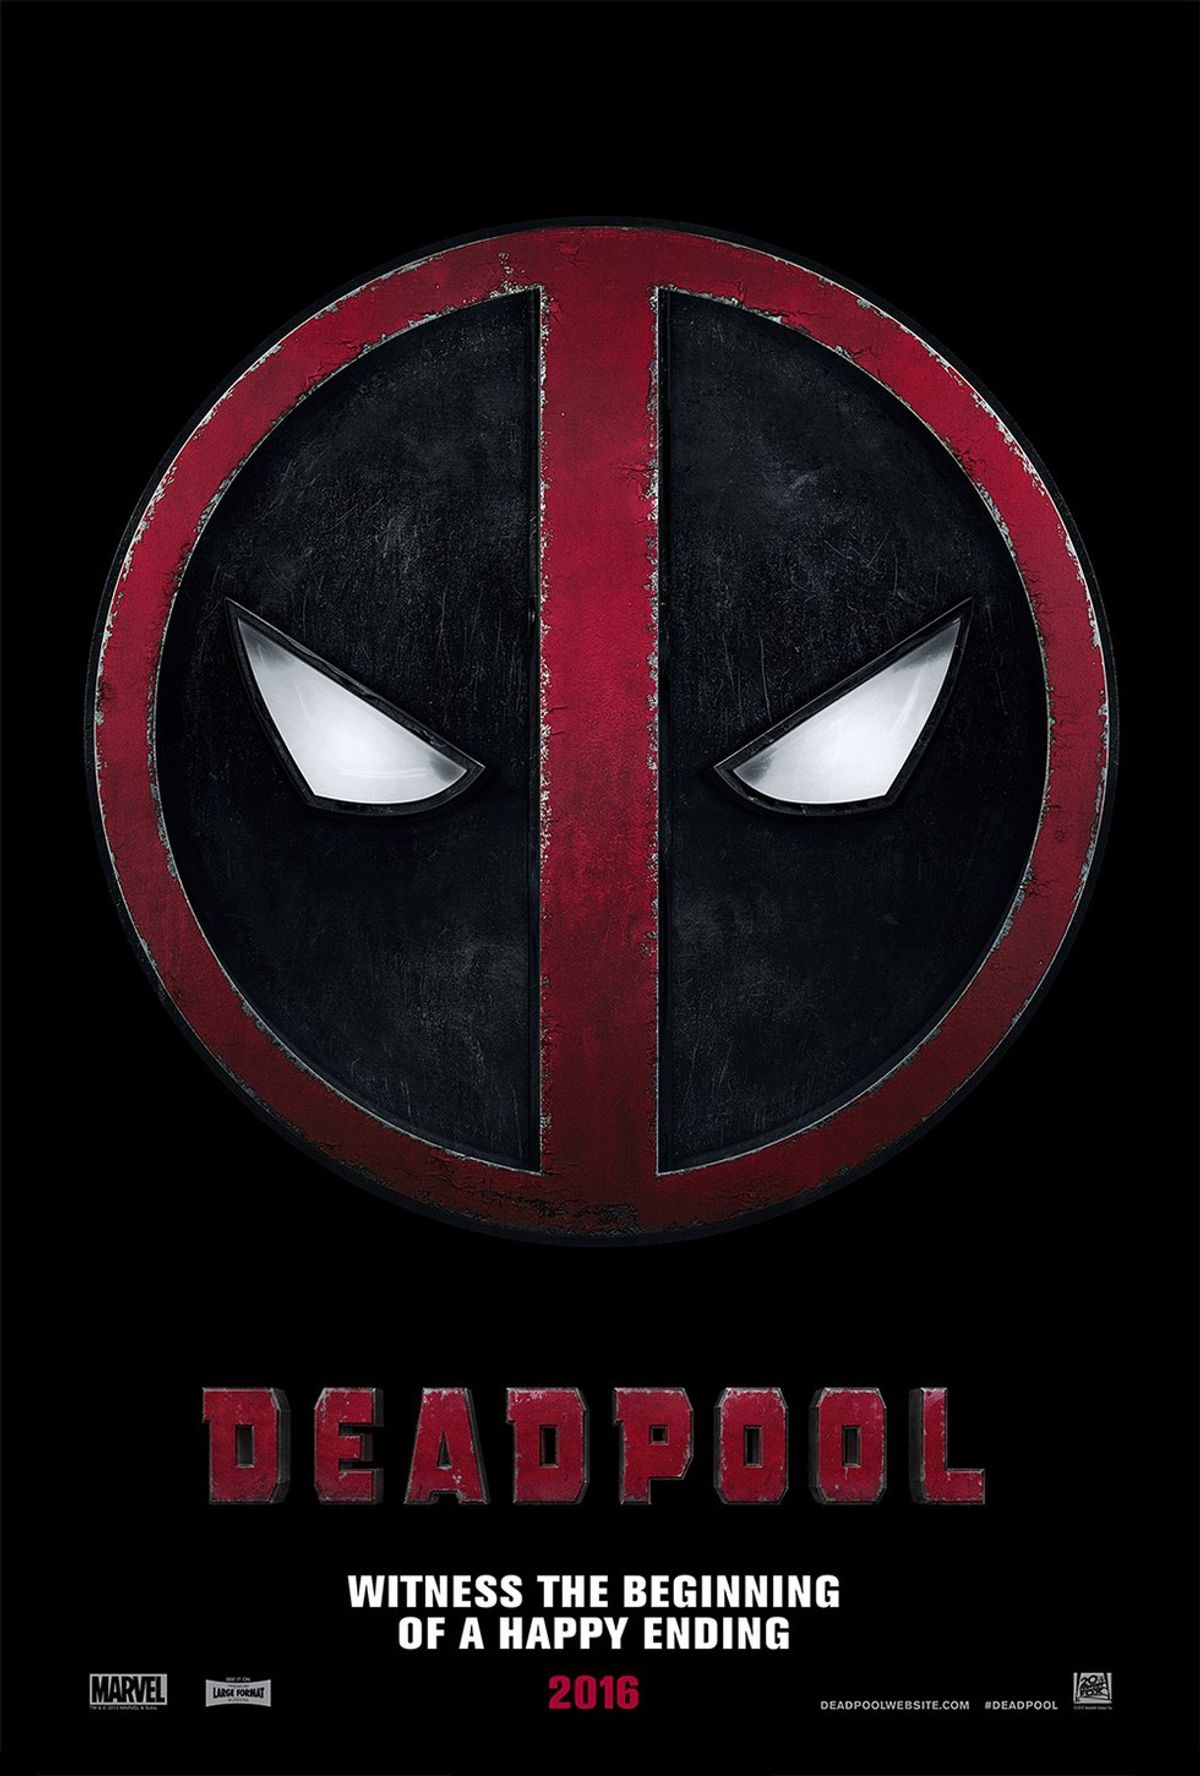 "Deadpool" To Be A Box Office Success